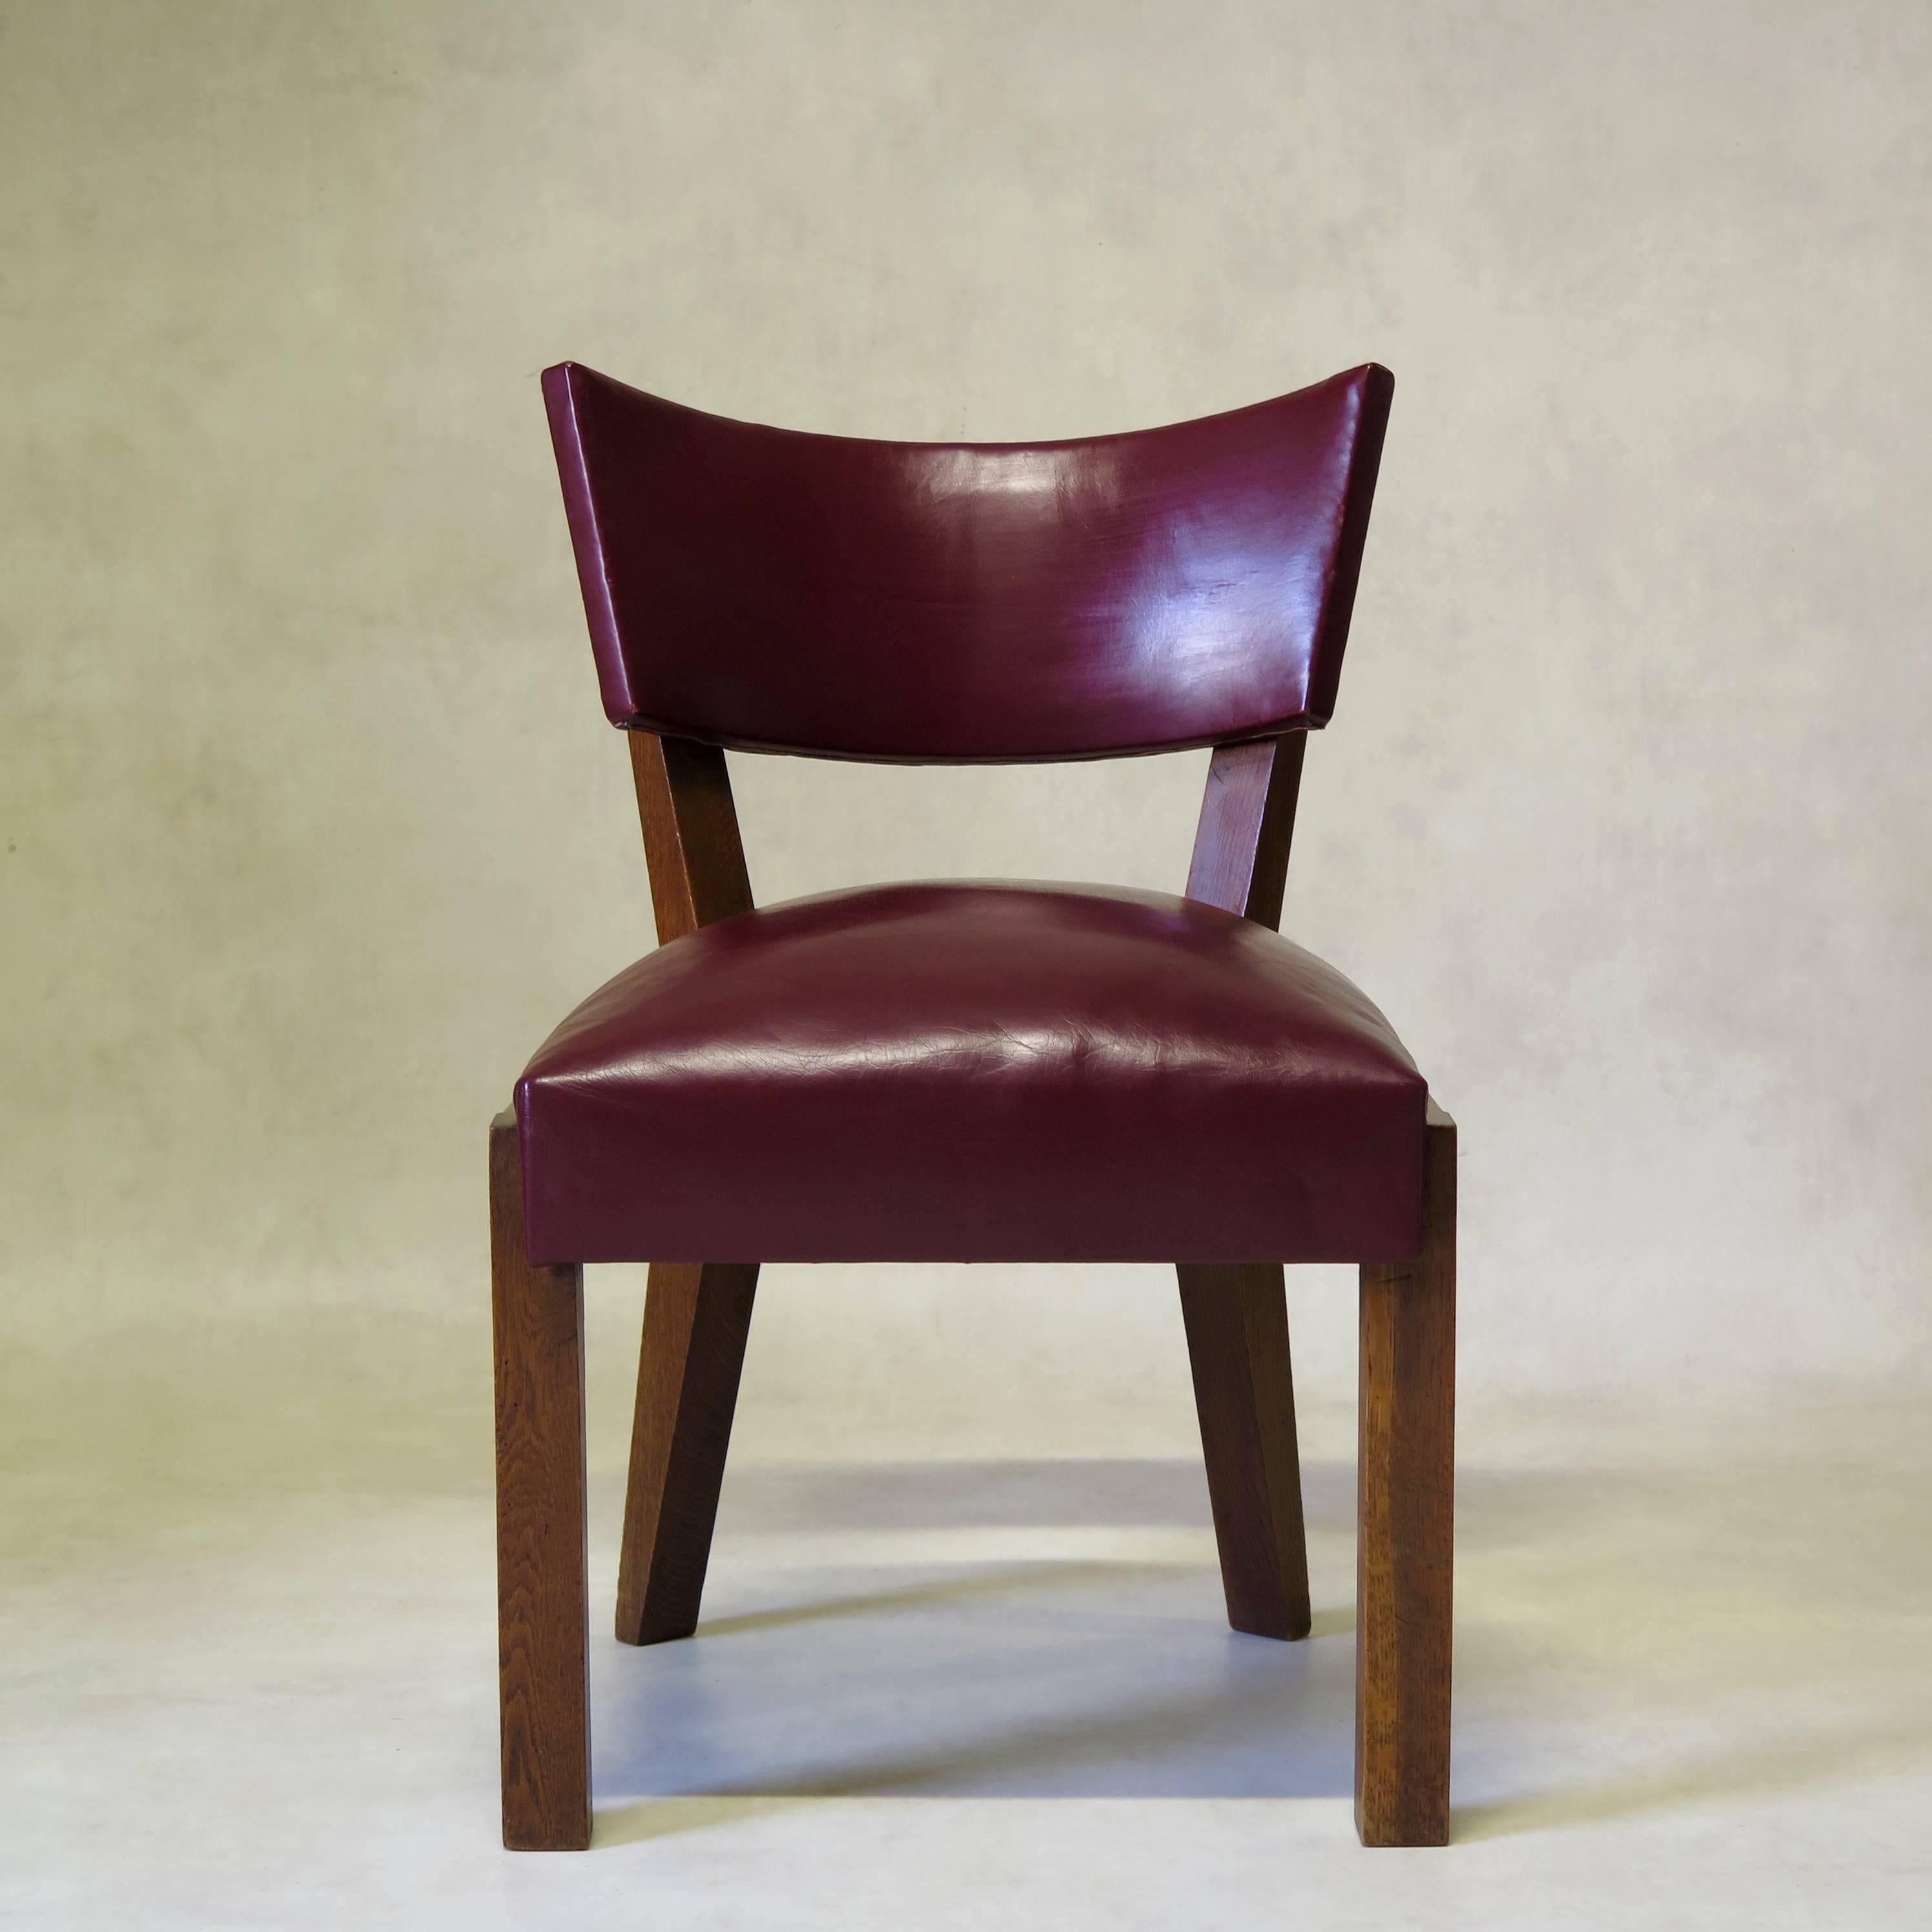 Very chic and gorgeous quality set of eight solid oak, 1940s Art Moderne dining chairs of generous proportions, with wide, comfortable seats and curved backs, upholstered in dark red leather, with nailhead trim on the back.
The graphic, unfussy